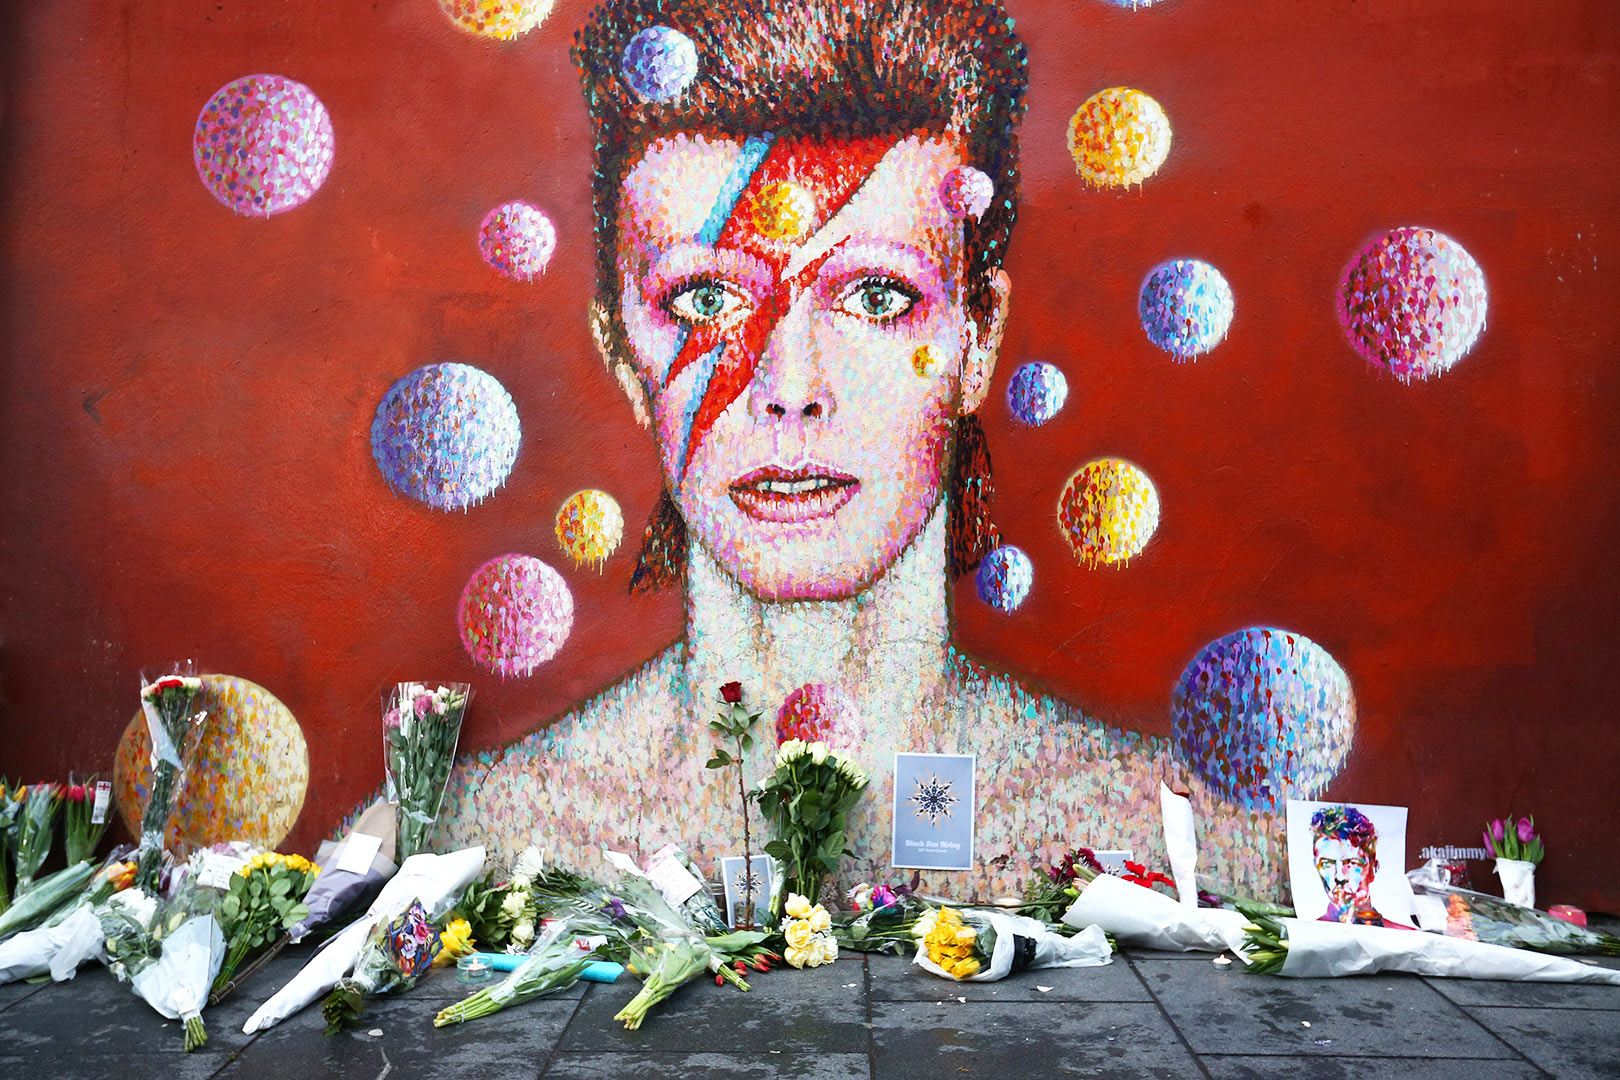 David Bowie Death Sparks Tributes Around the World: See the Most Unusual